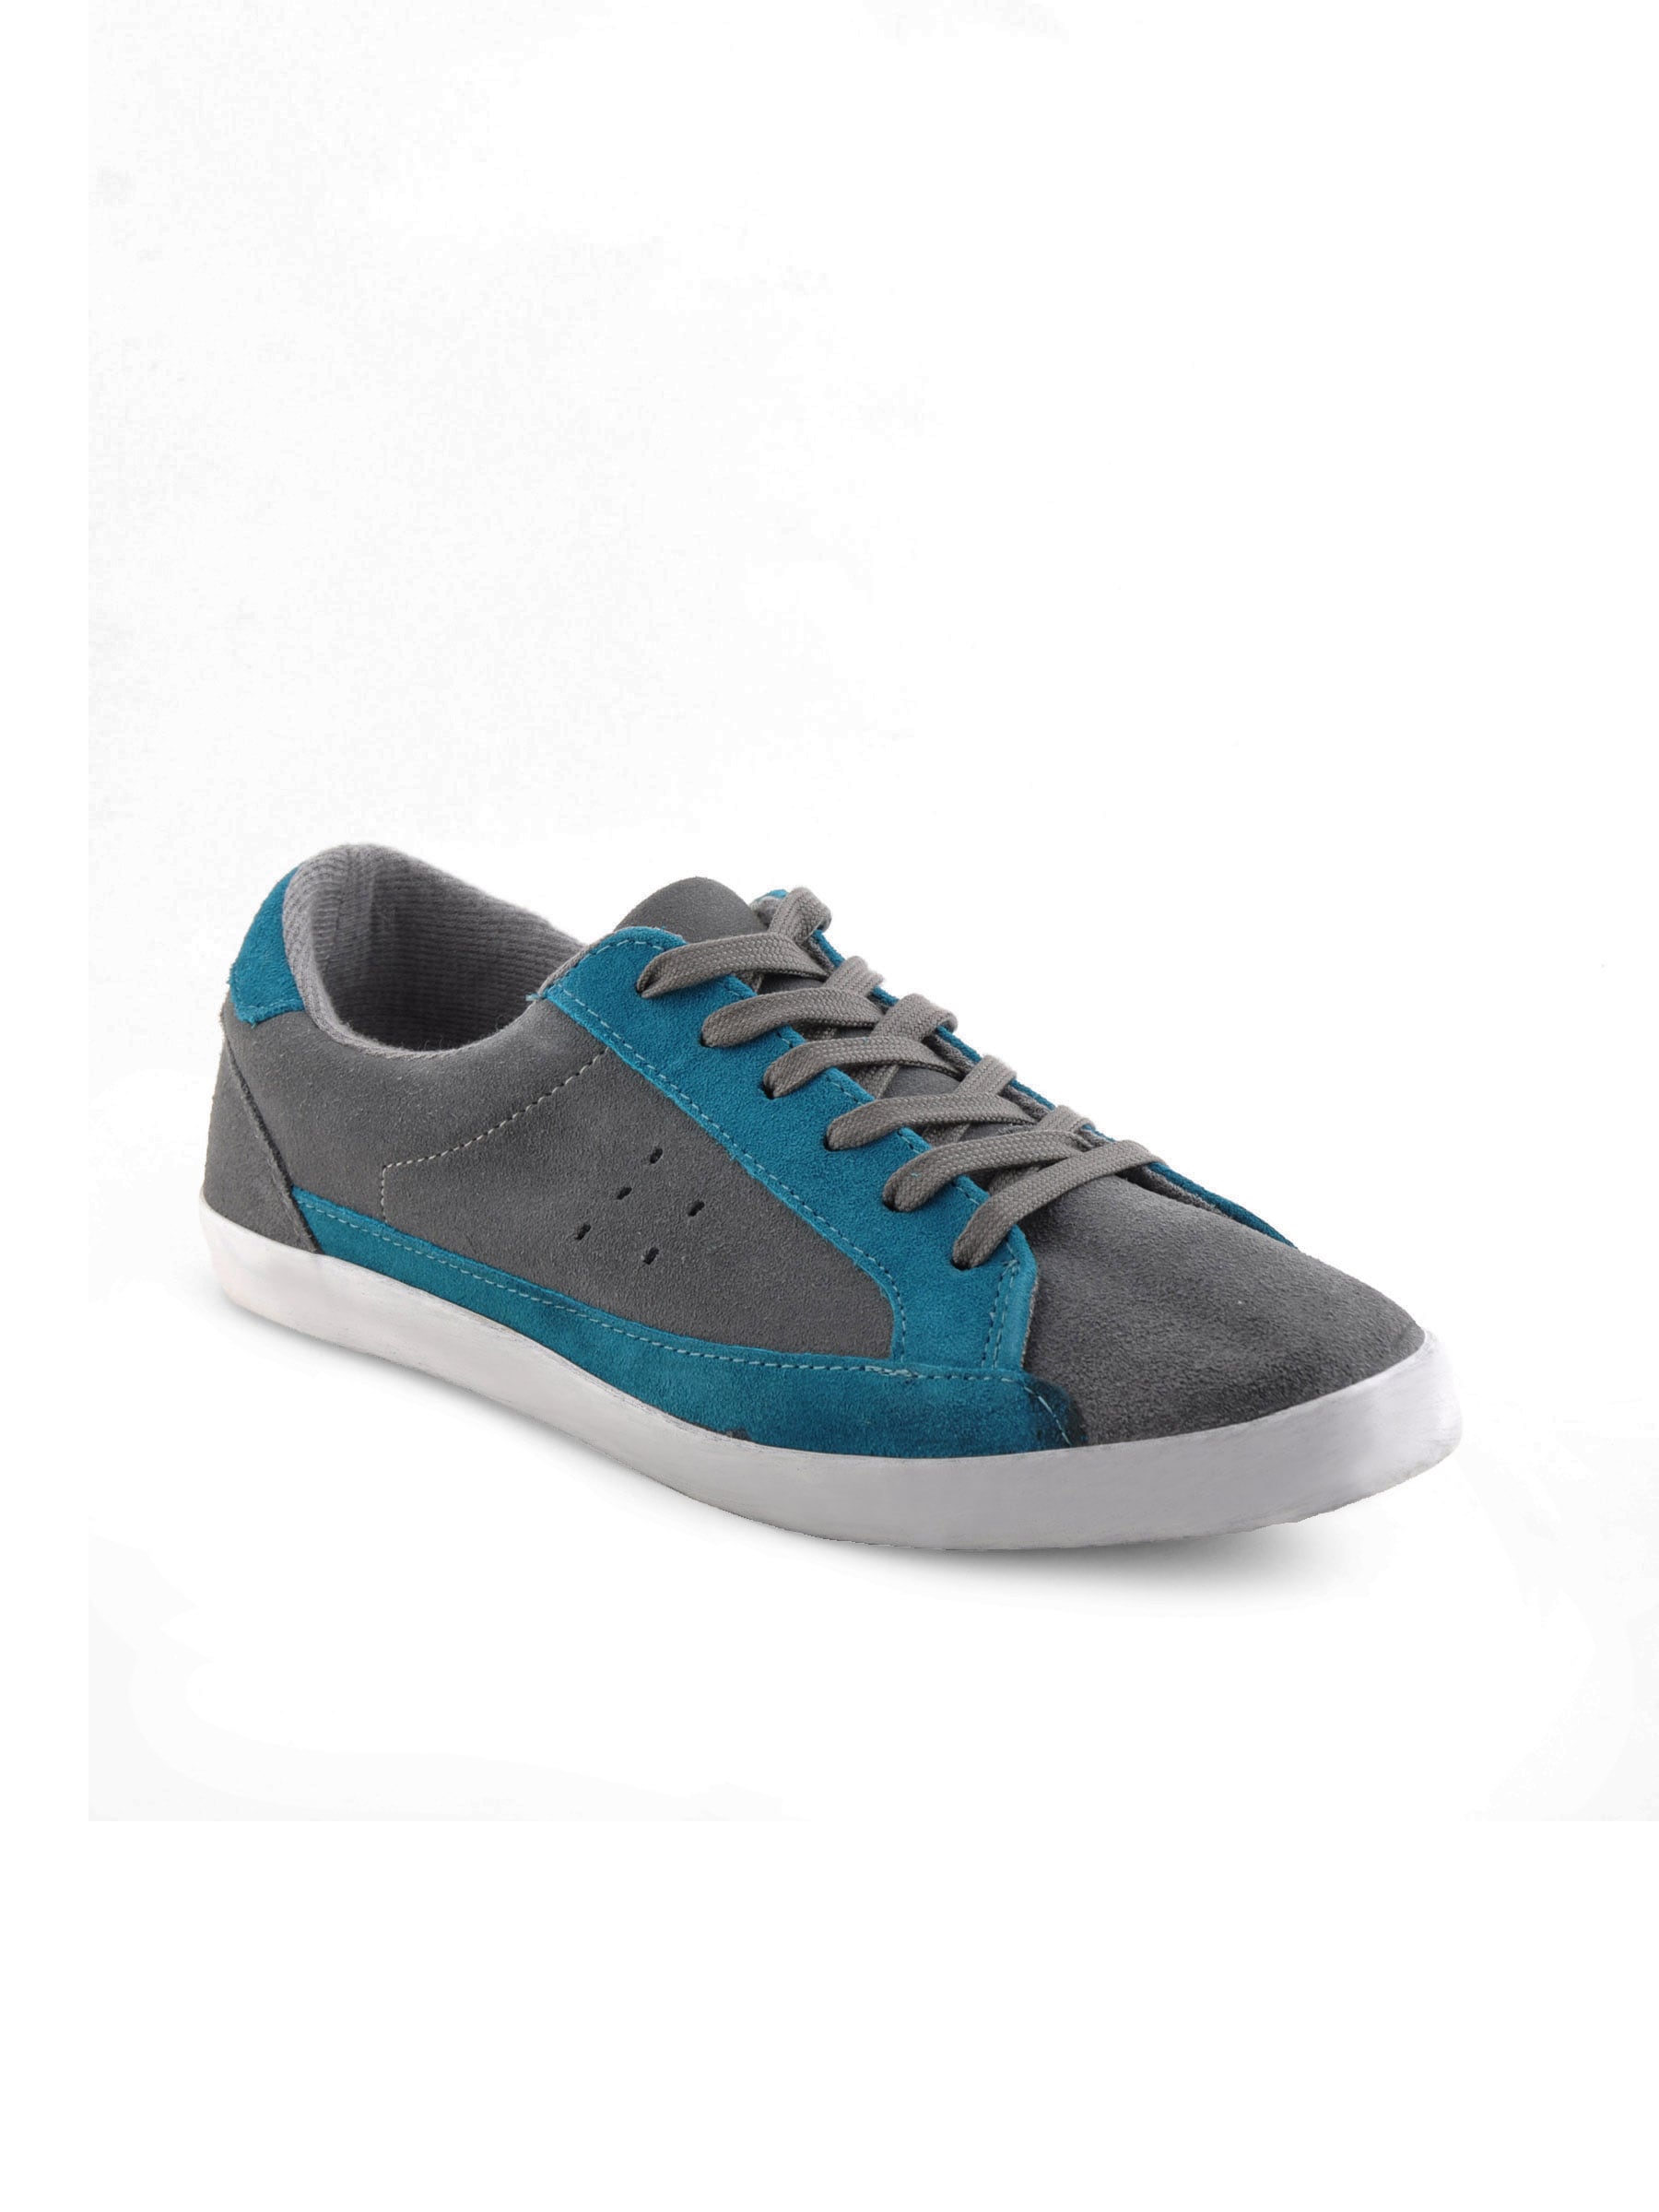 United Colors of Benetton Men Casual Grey Shoes